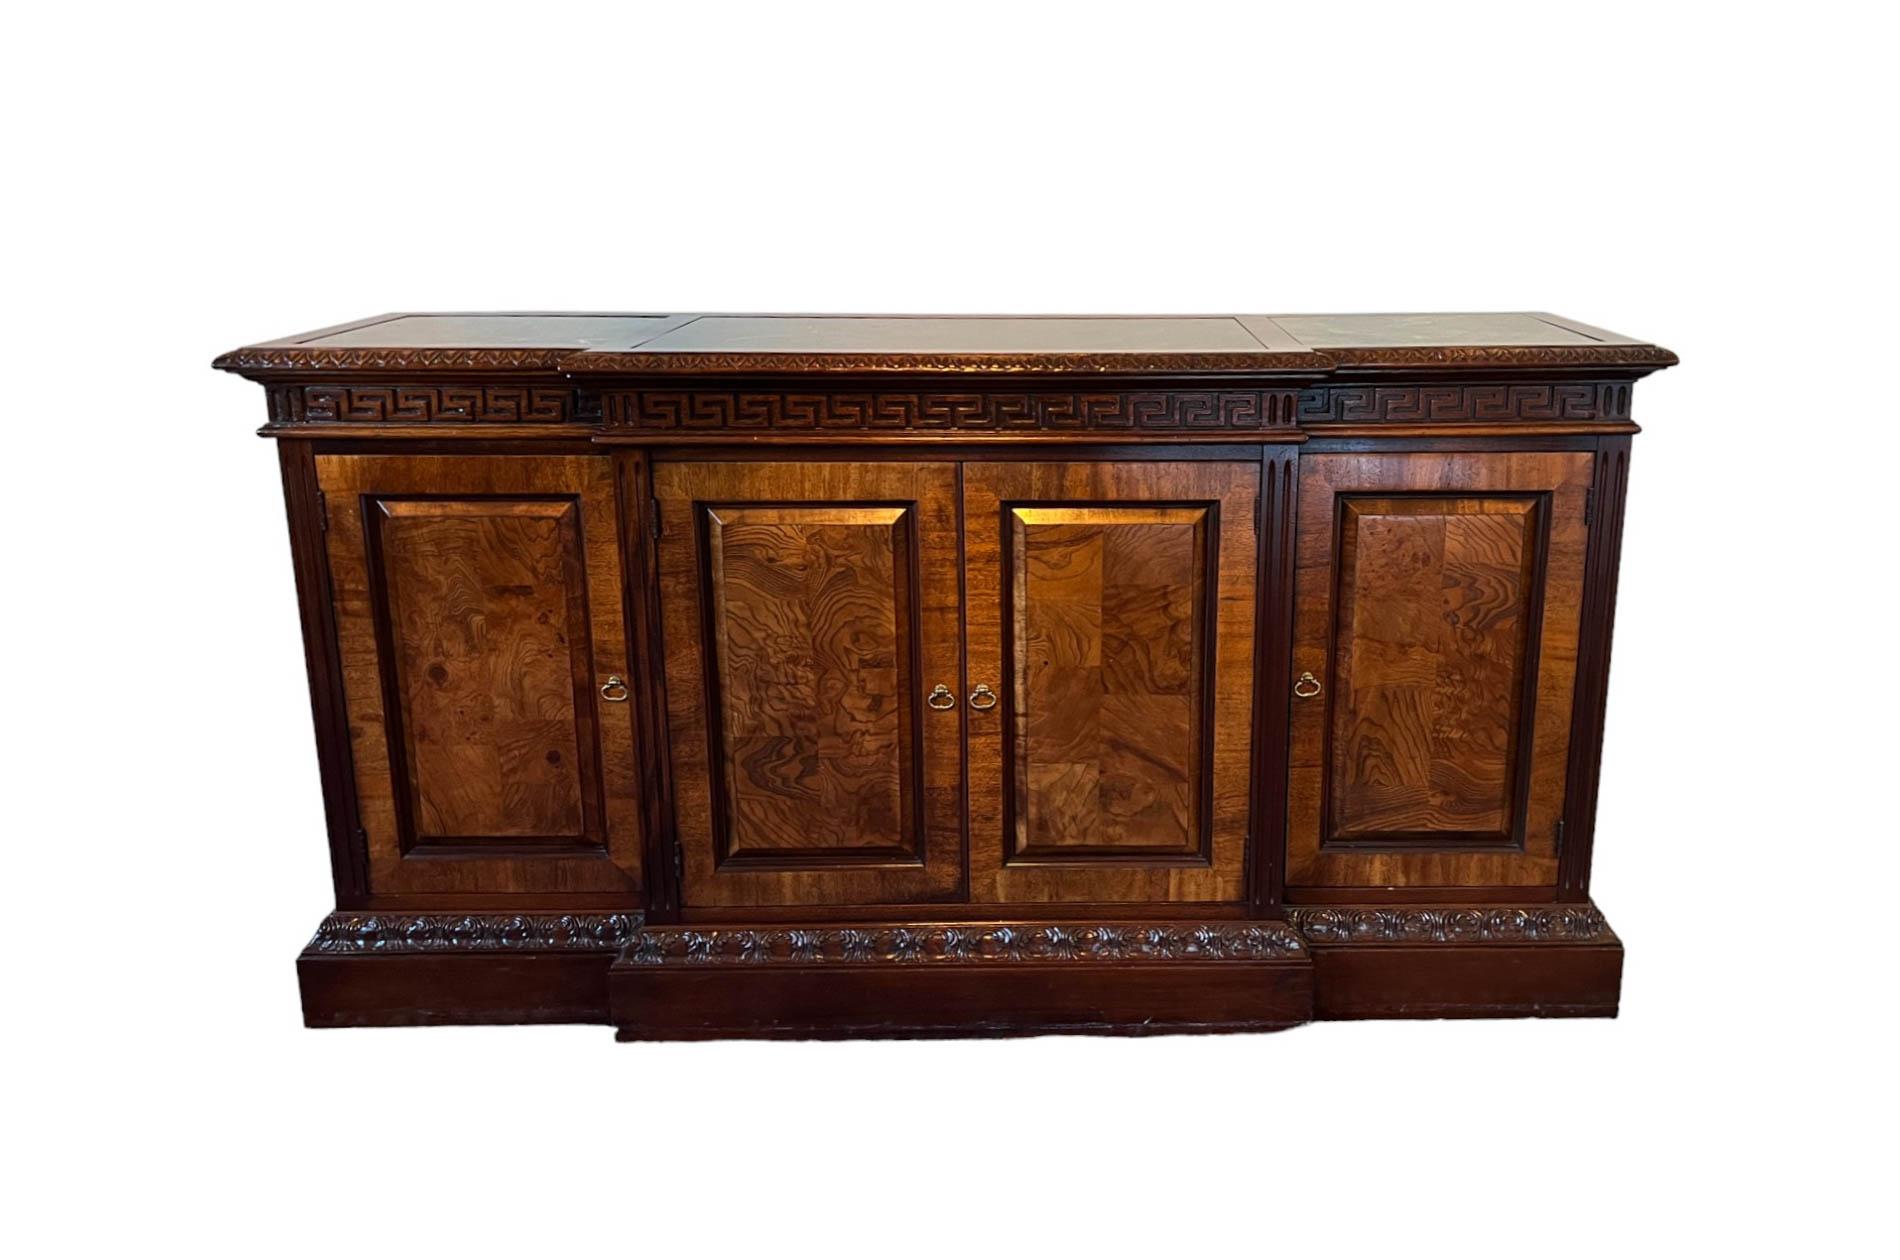 Offering a Mahogany Buffet/Credenza with green Marble Top Inset by Hekman.

The buffet features the classic Greek key design along the top apron. The interior features two levels for storage and a lockable drawer (original key included as